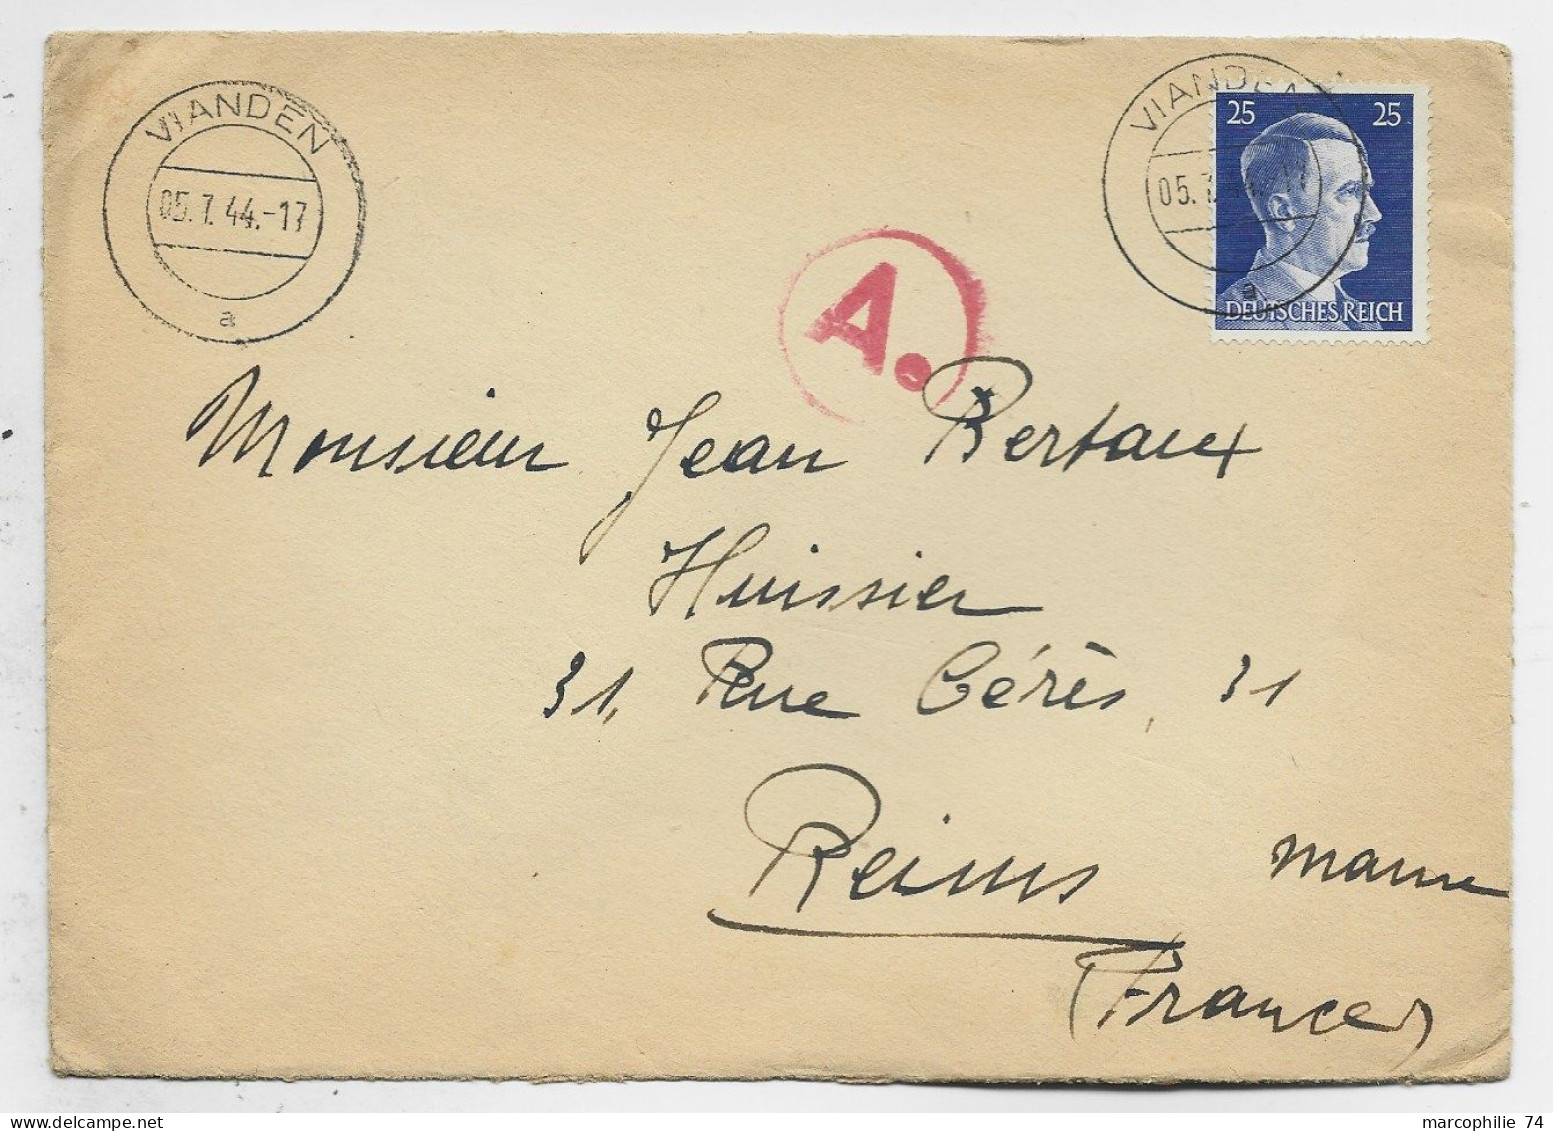 GERMANY 25C HITLER SEUL LETTRE BRIEF COVER VIANDEN 05.1.1944  LUXEMBOURG POUR REIMS MARNE + CENSURE AE - 1940-1944 German Occupation